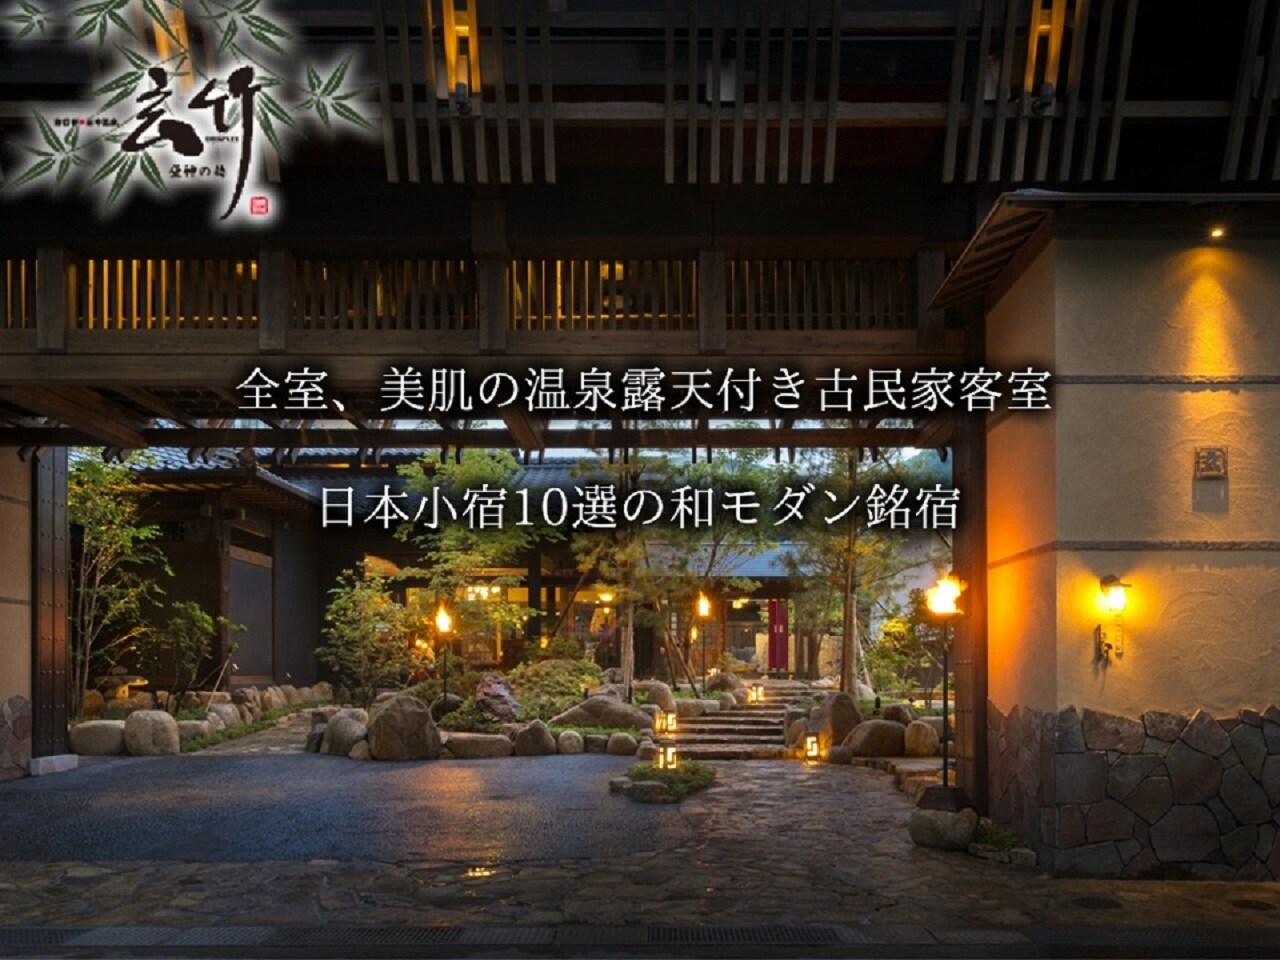 [Hirugami Onsen Gentake] All rooms, guest rooms with open-air hot springs with beautiful skin, 10 famous Japanese inns